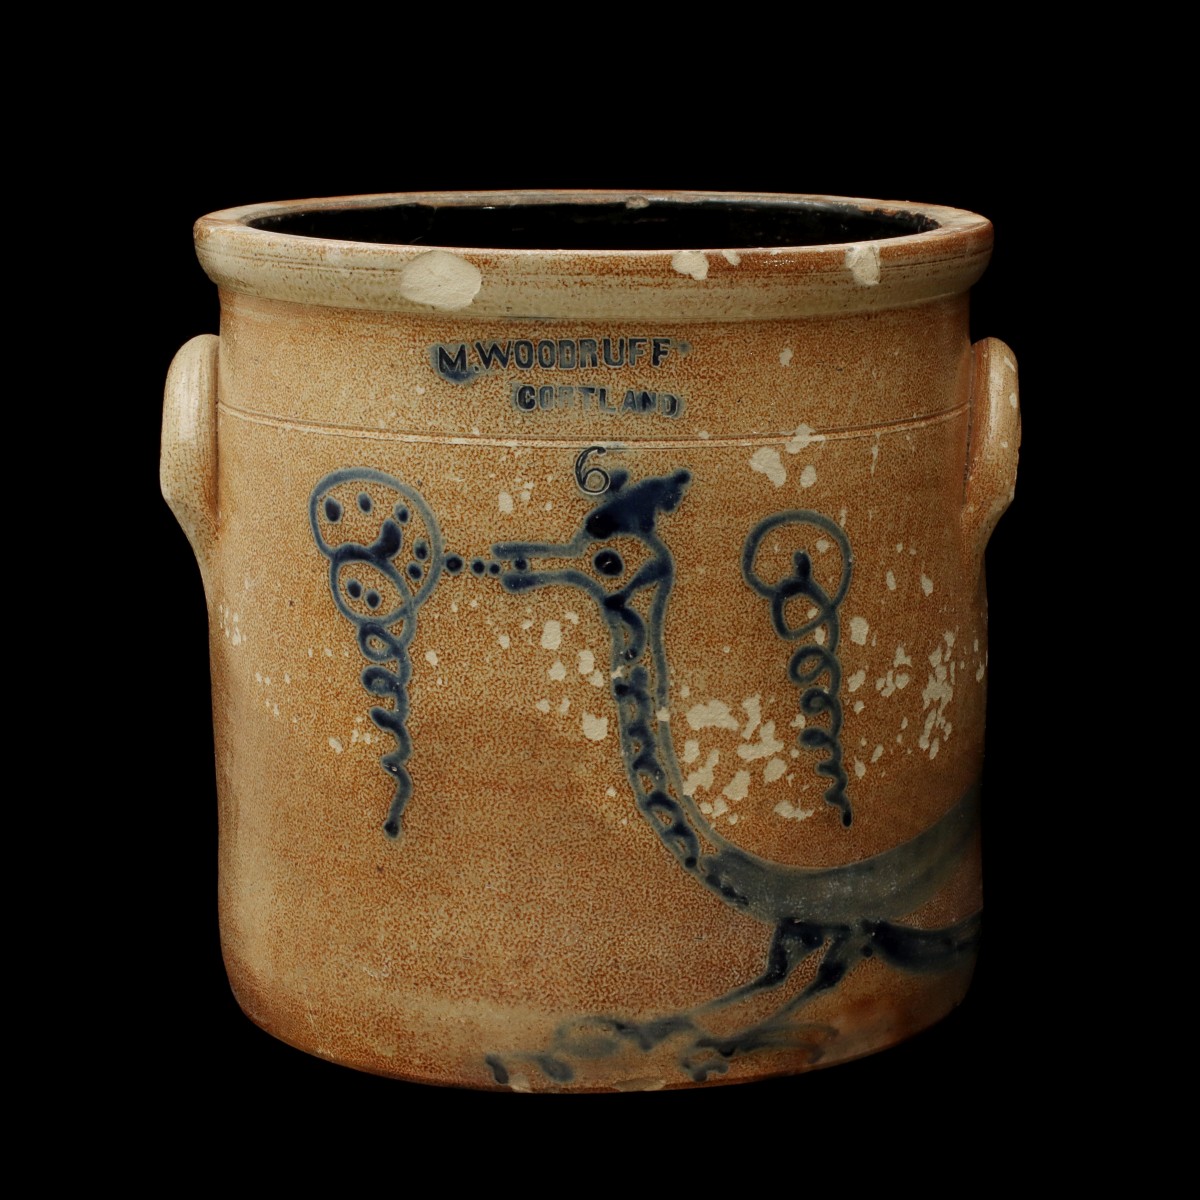 A WOODRUFF BLUE DECORATED CROCK WITH MYTHICAL BIRD